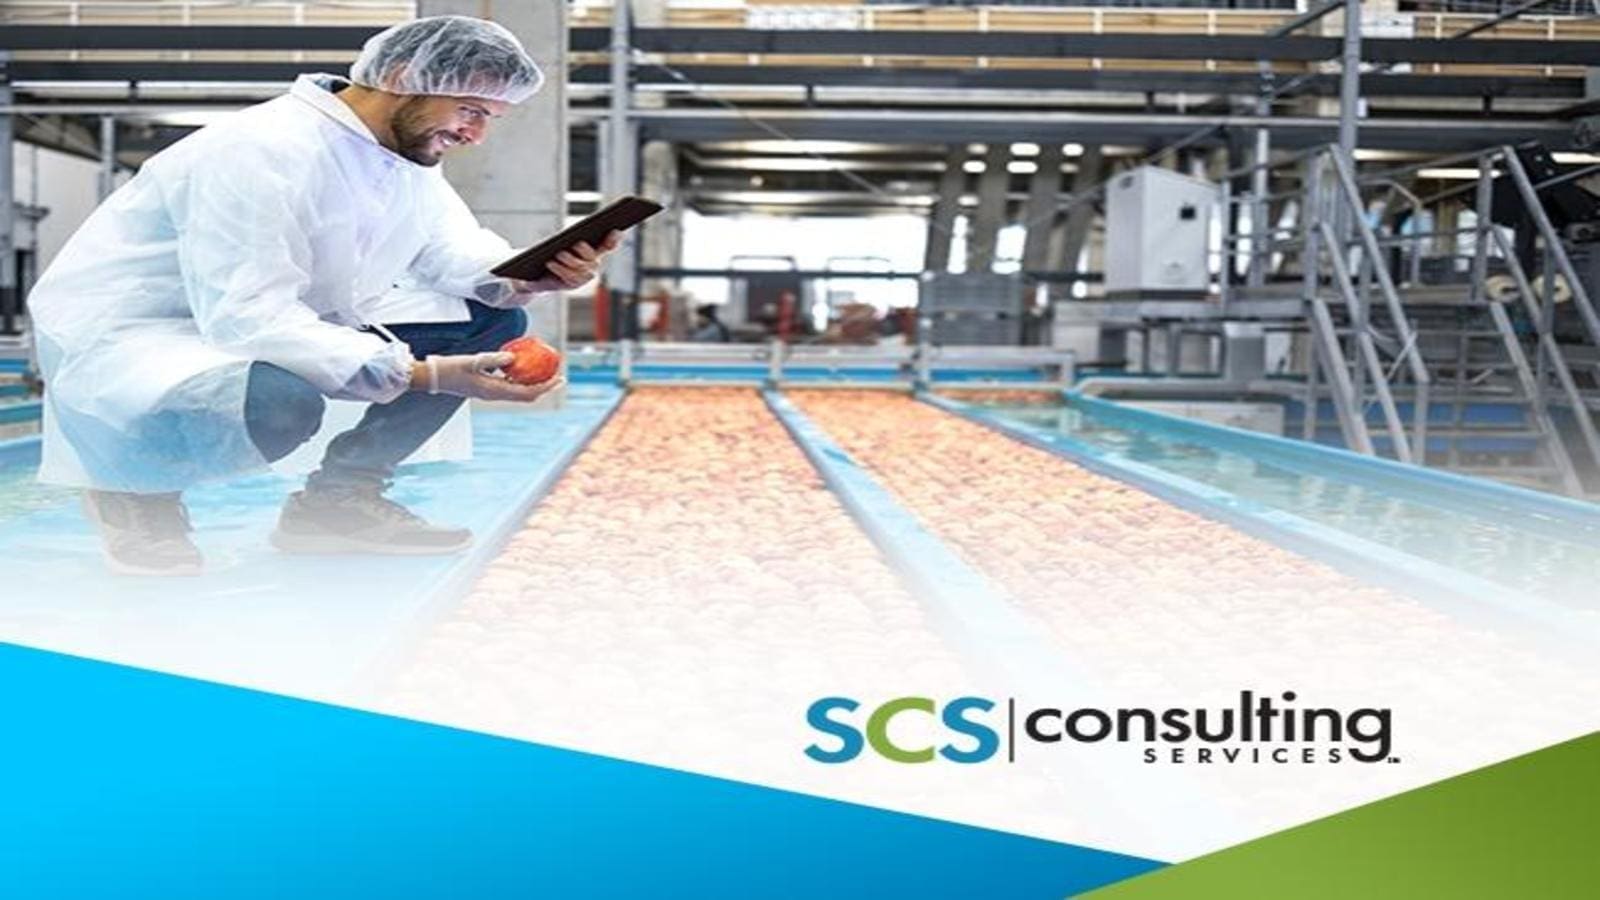 SCS Consulting Services ventures into food safety consultancy